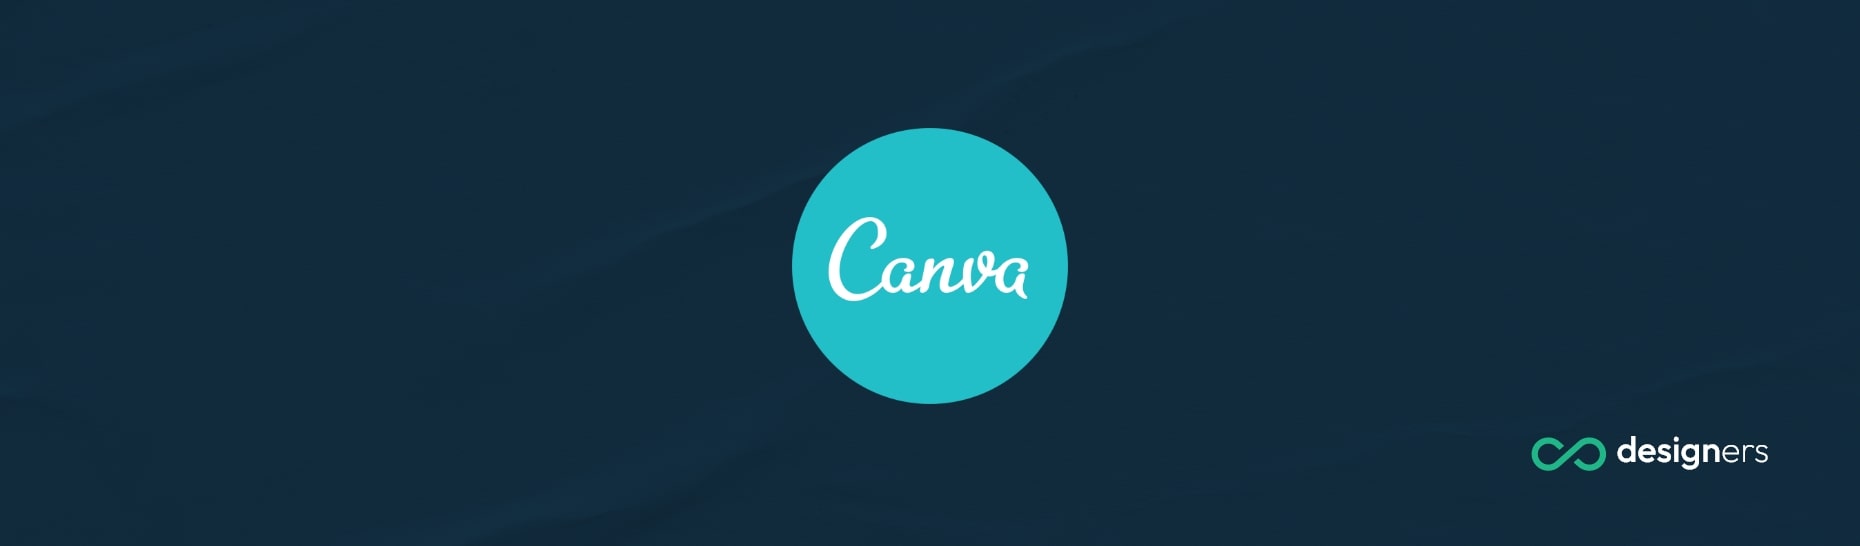 What Font Is Didot in Canva?